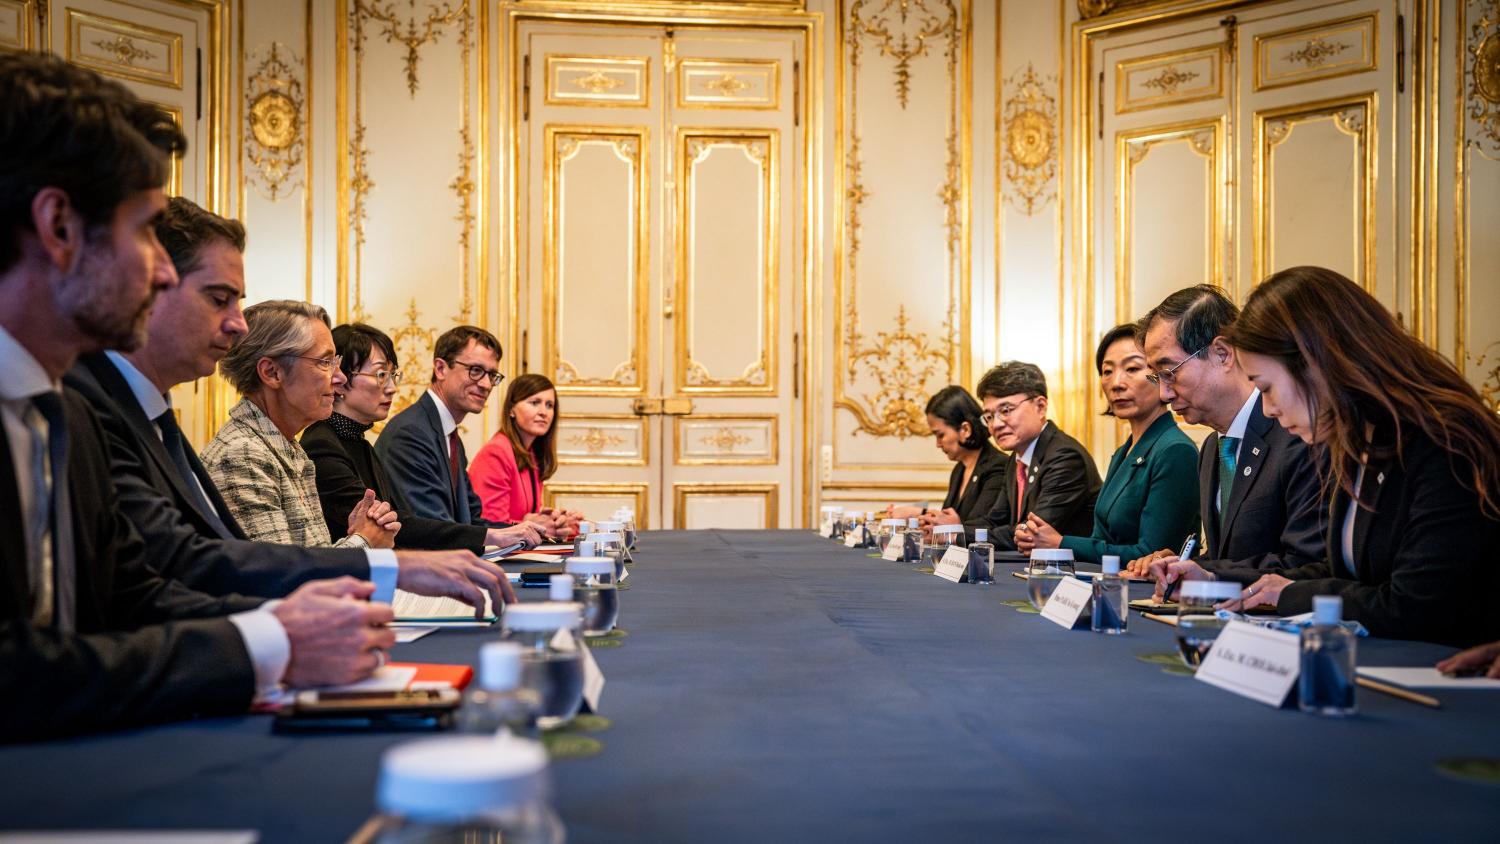 A meeting between the French prime minister and the prime minister of the Republic of Korea at the Hôtel Matignon.